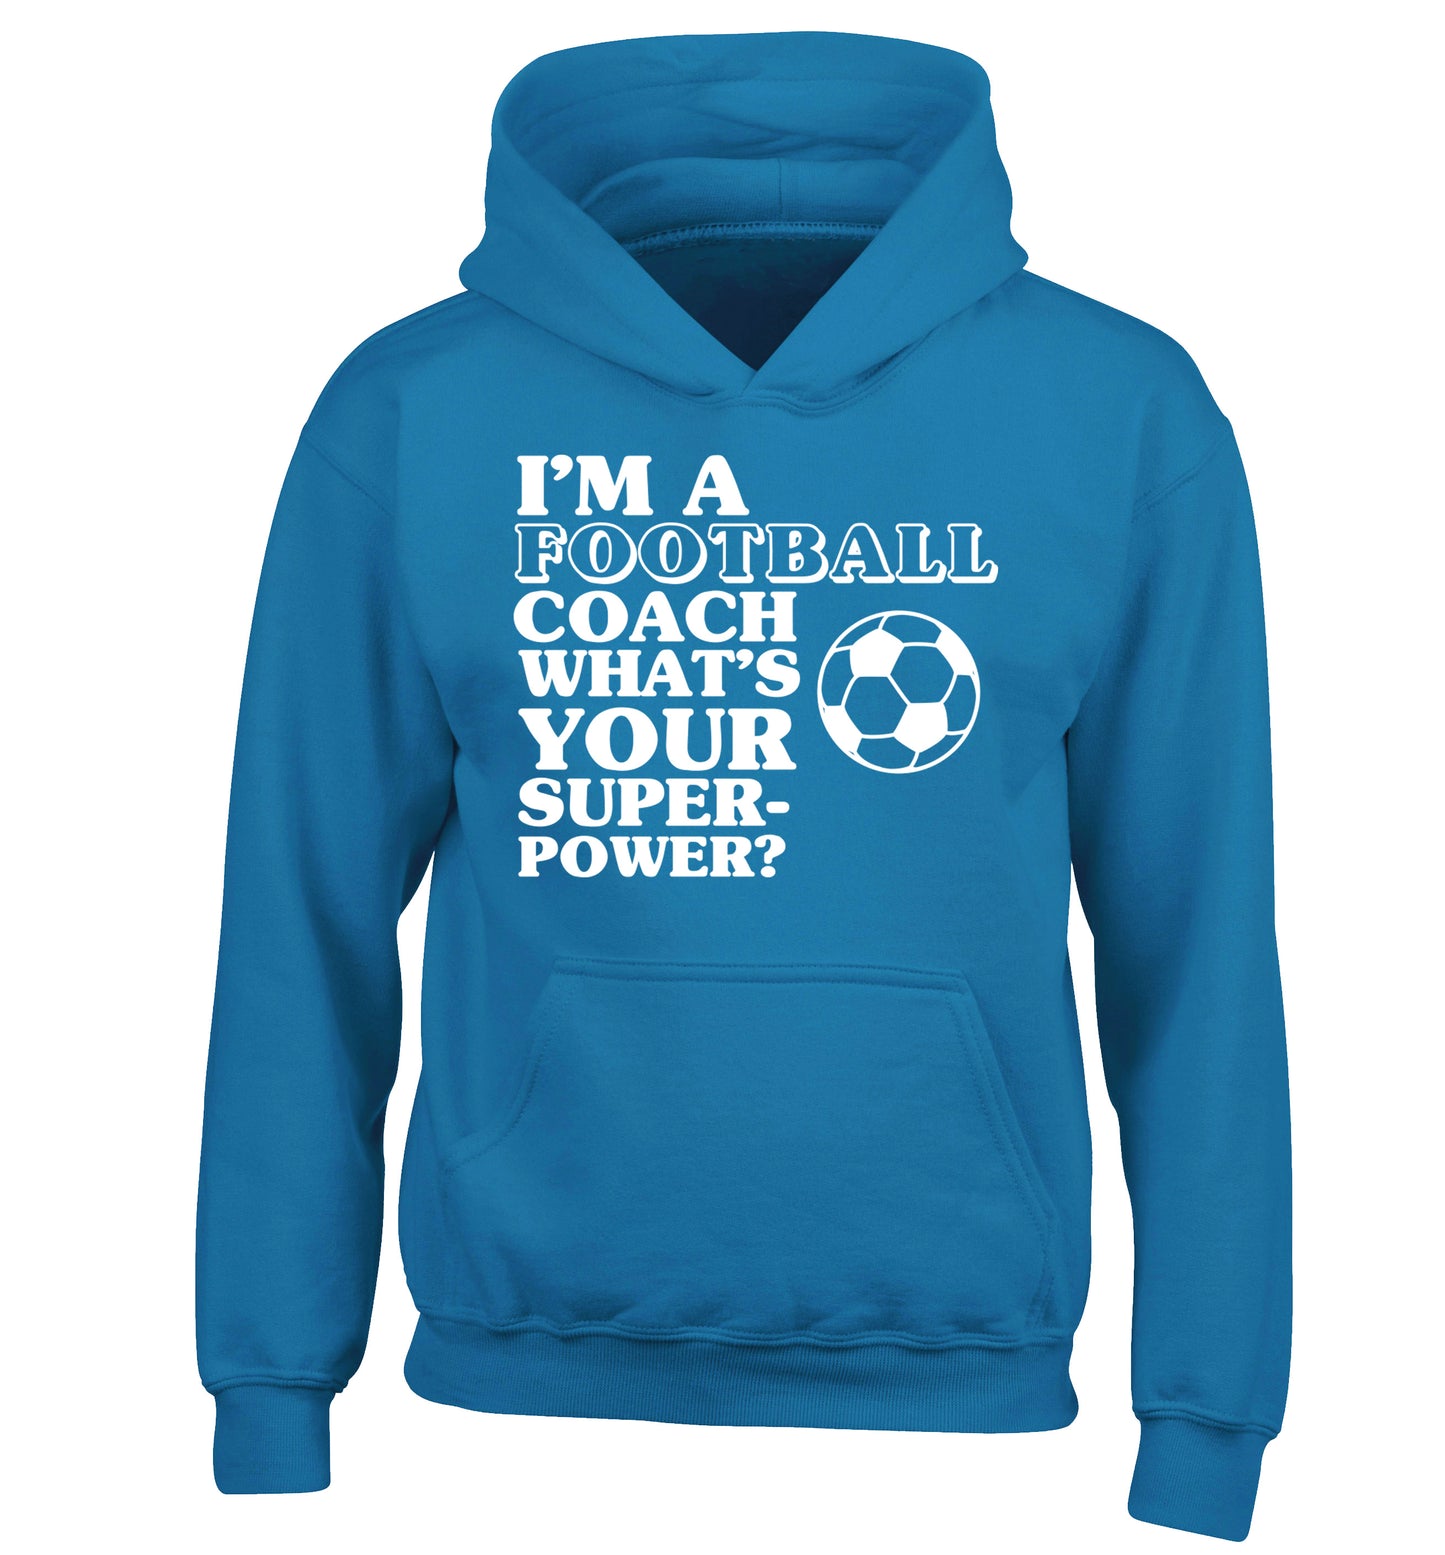 I'm a football coach what's your superpower? children's blue hoodie 12-14 Years